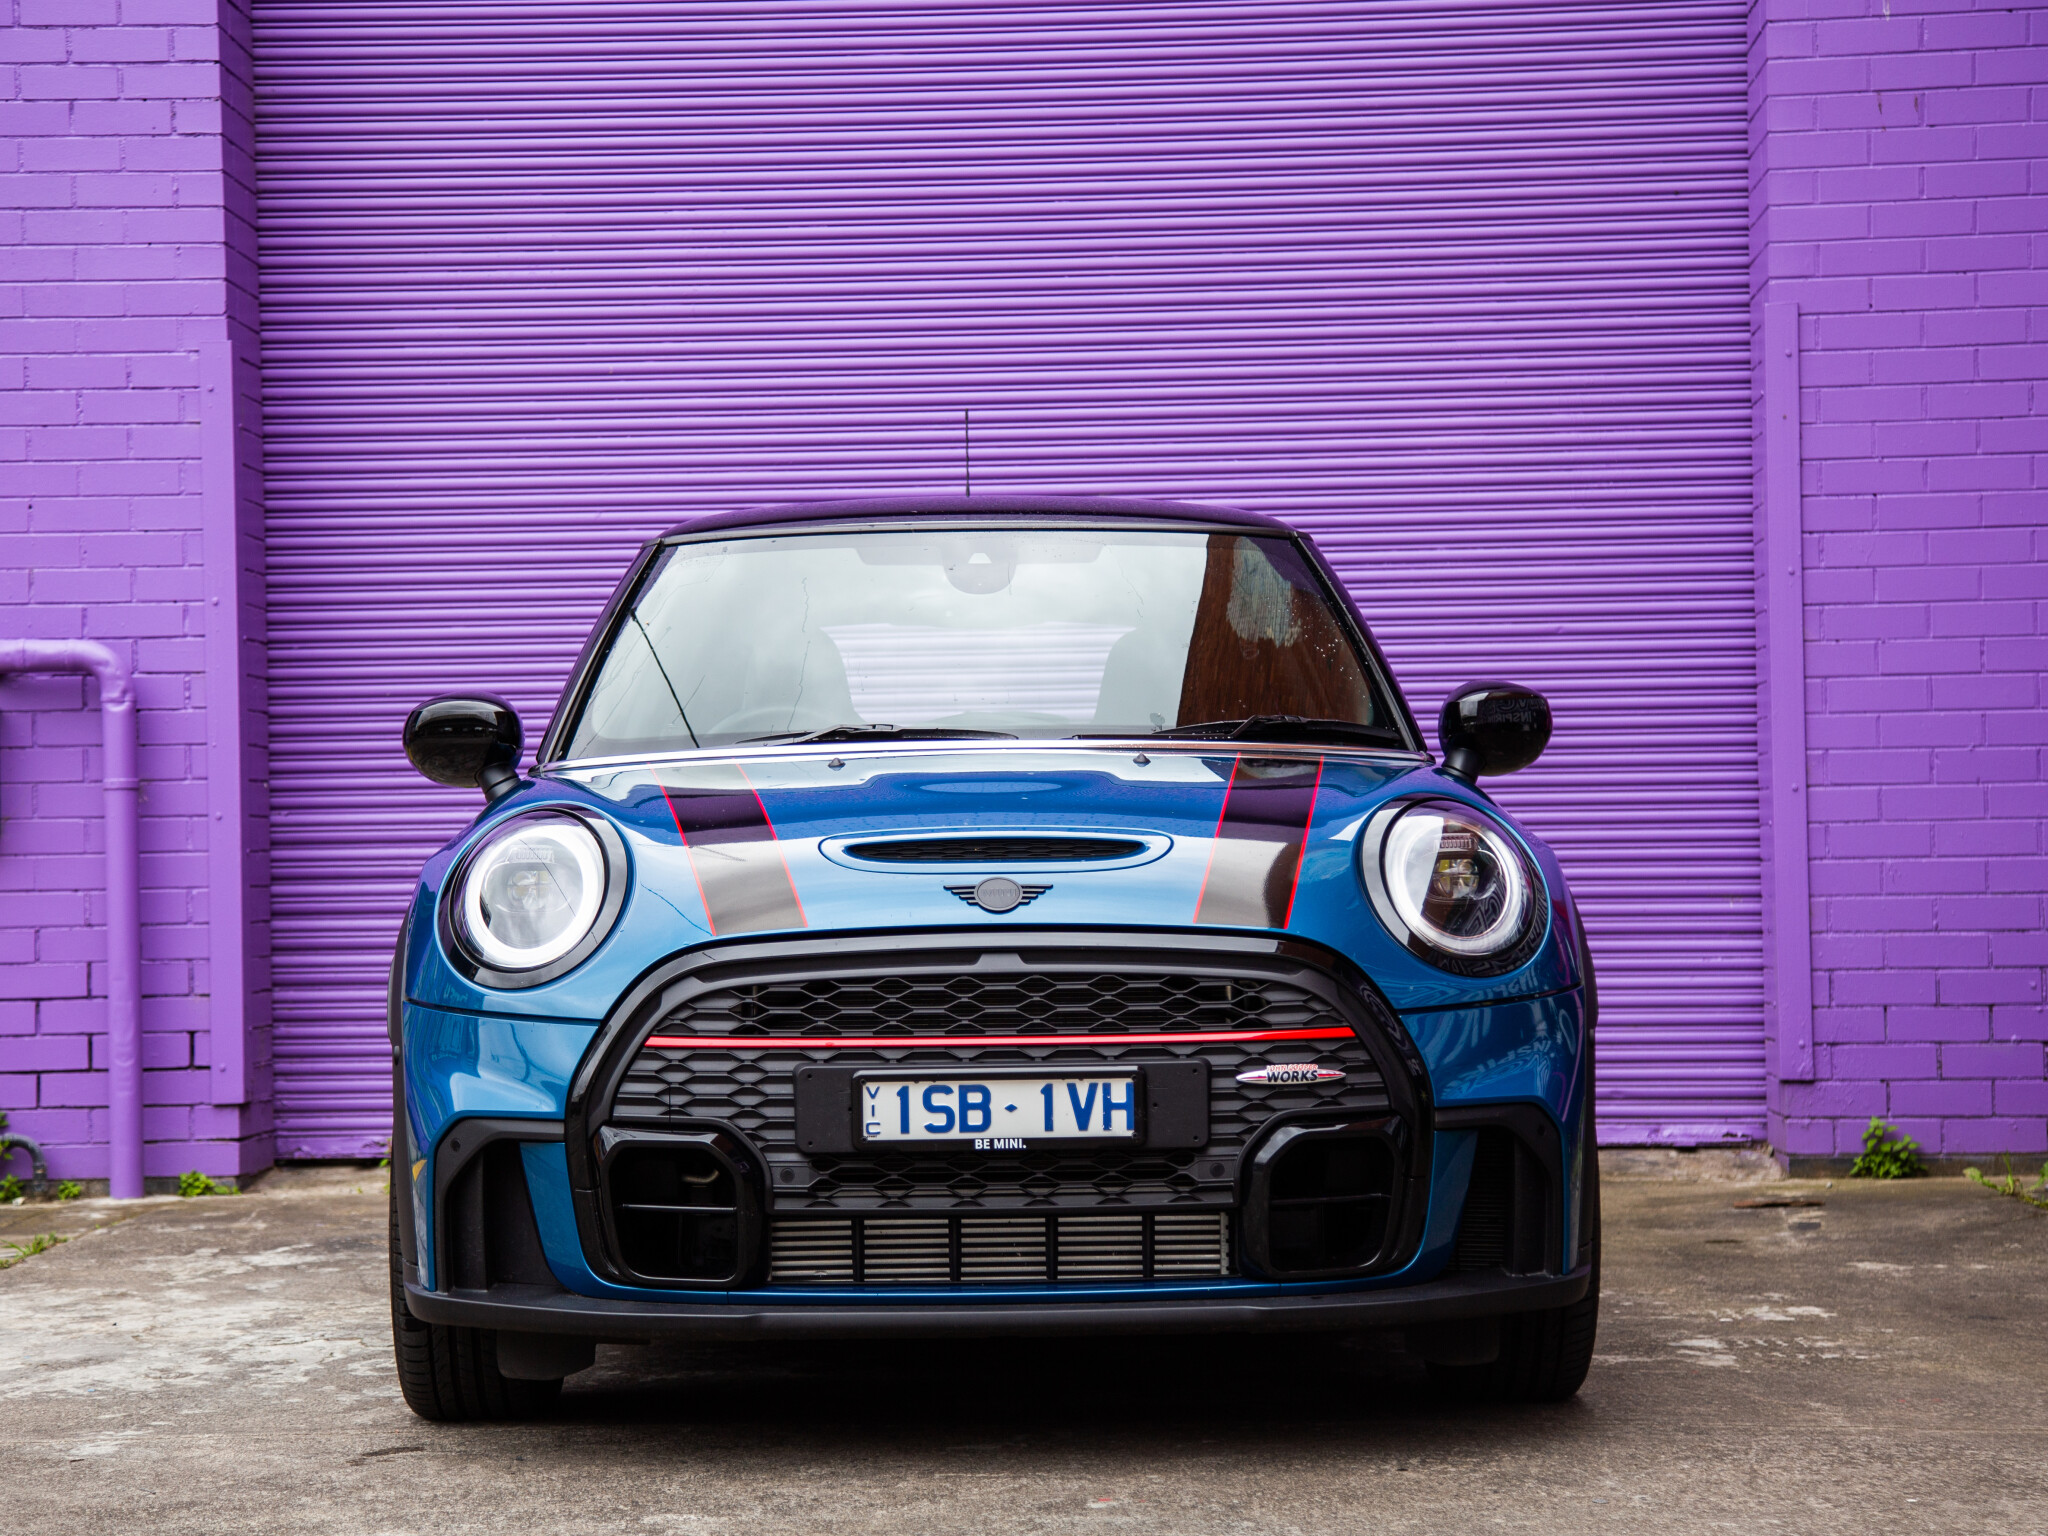 The Mini Cooper that changed my mind